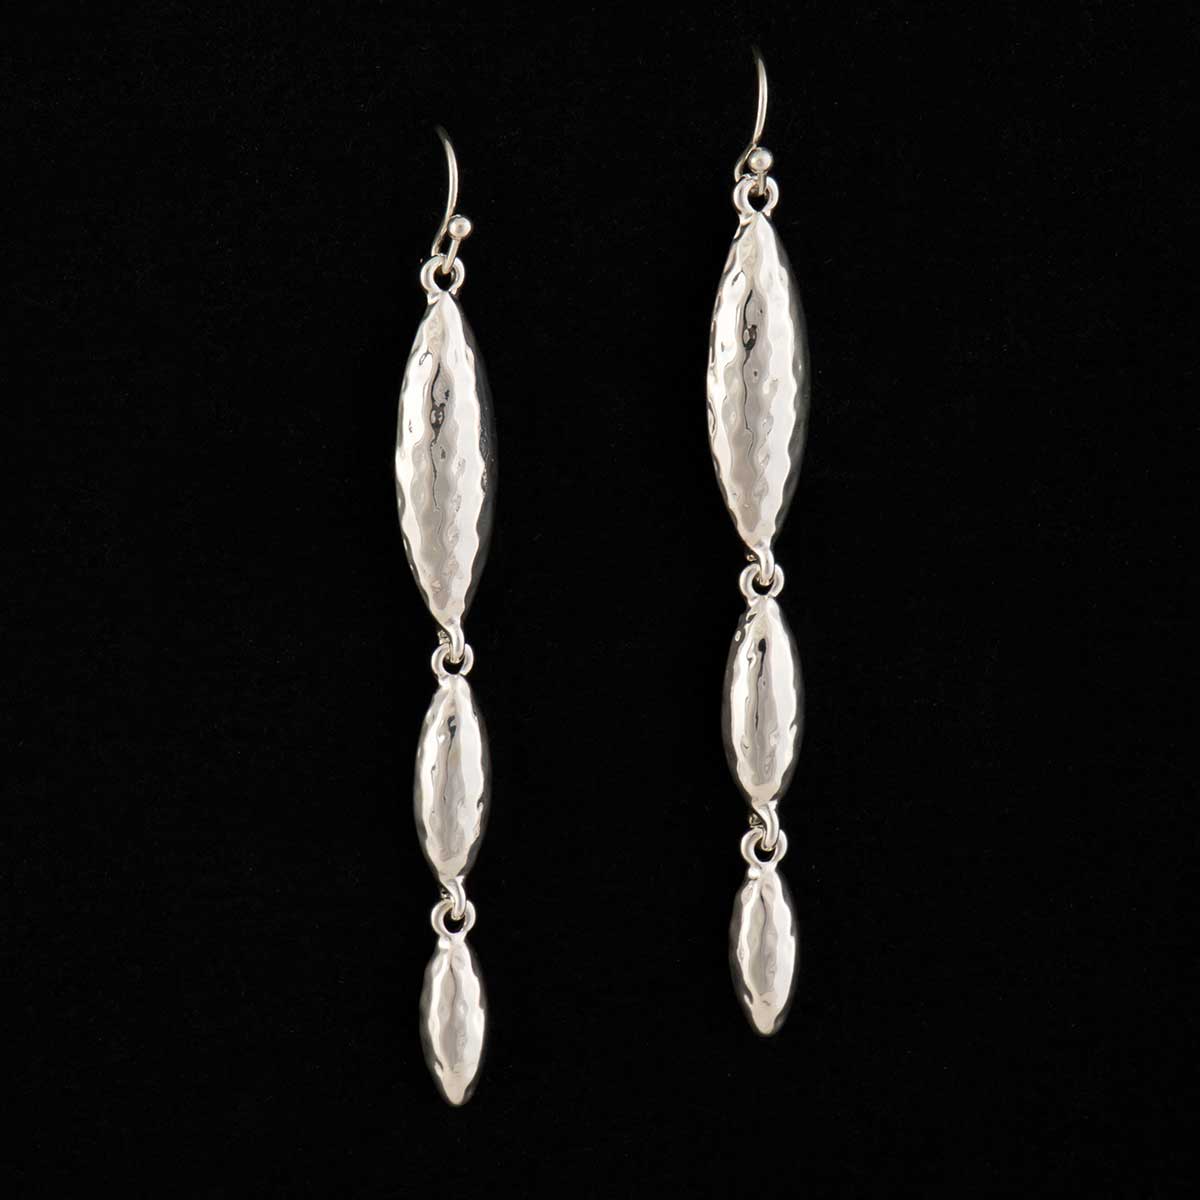 Silver Connecting Teardrop Dangle French Wire Earrings .375"x3.5